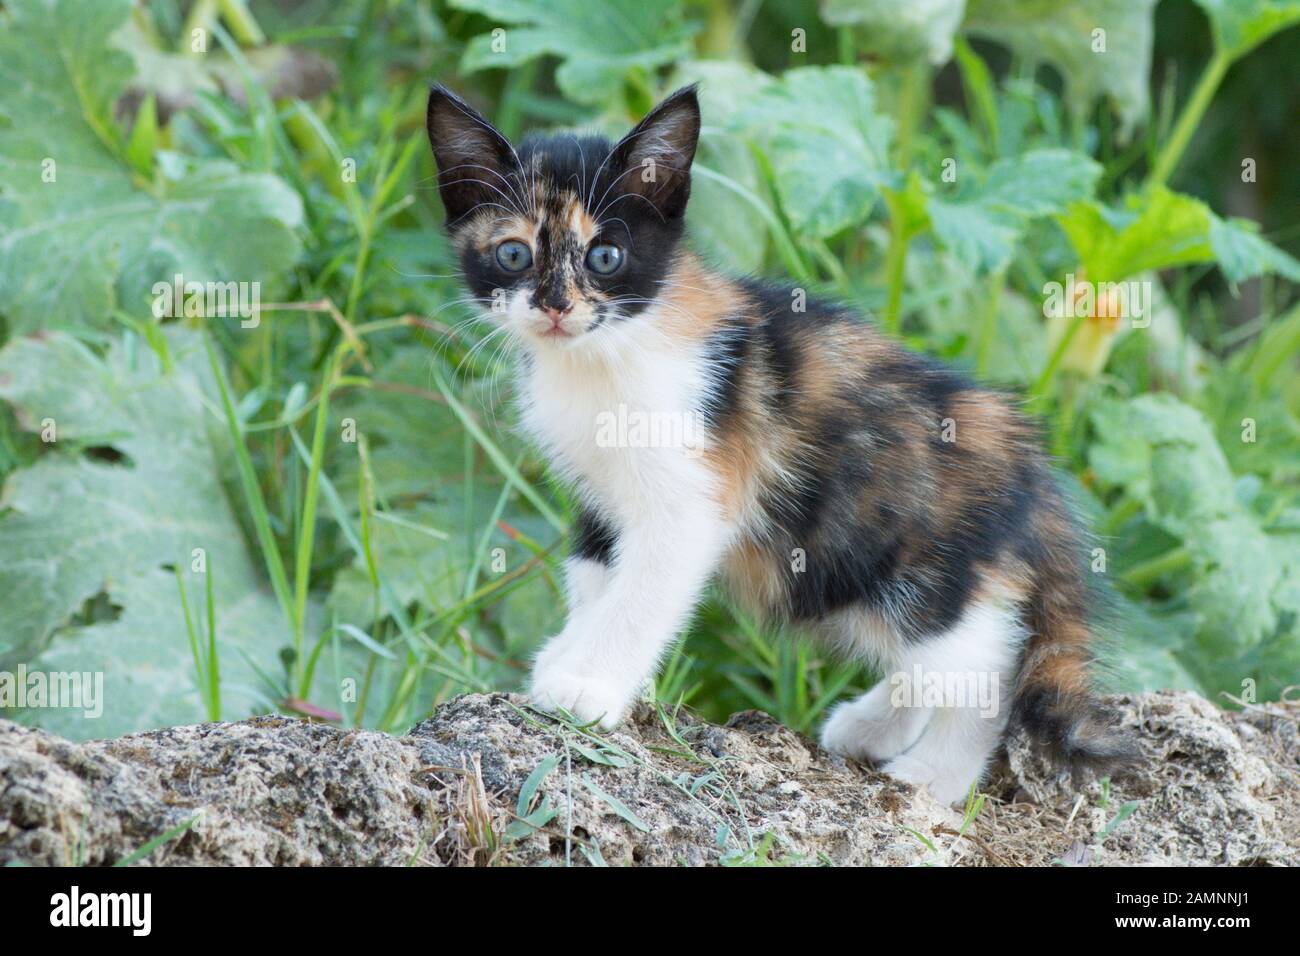 Kitten standing in front of a vegetable patch in Thassos, Greece Stock Photo